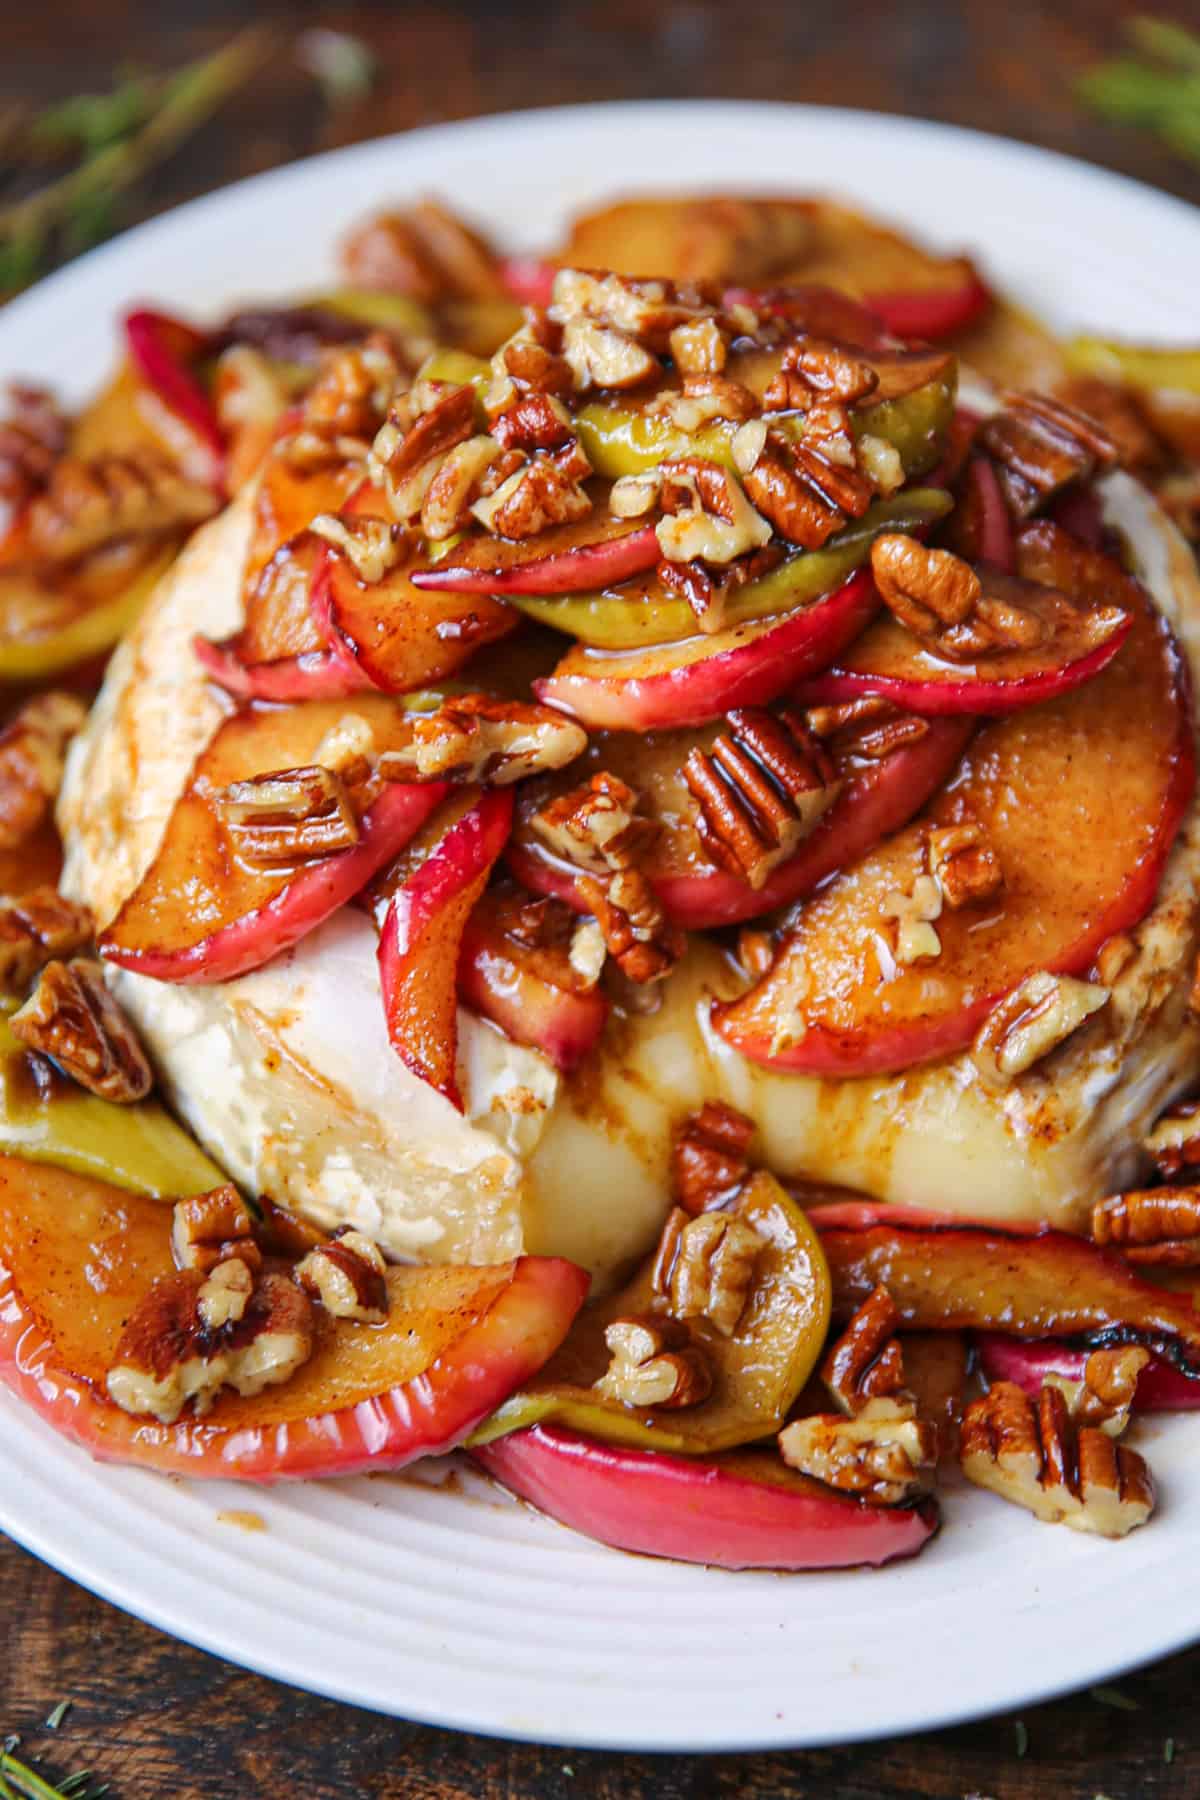 Baked berry with apples and pecans on a white plate